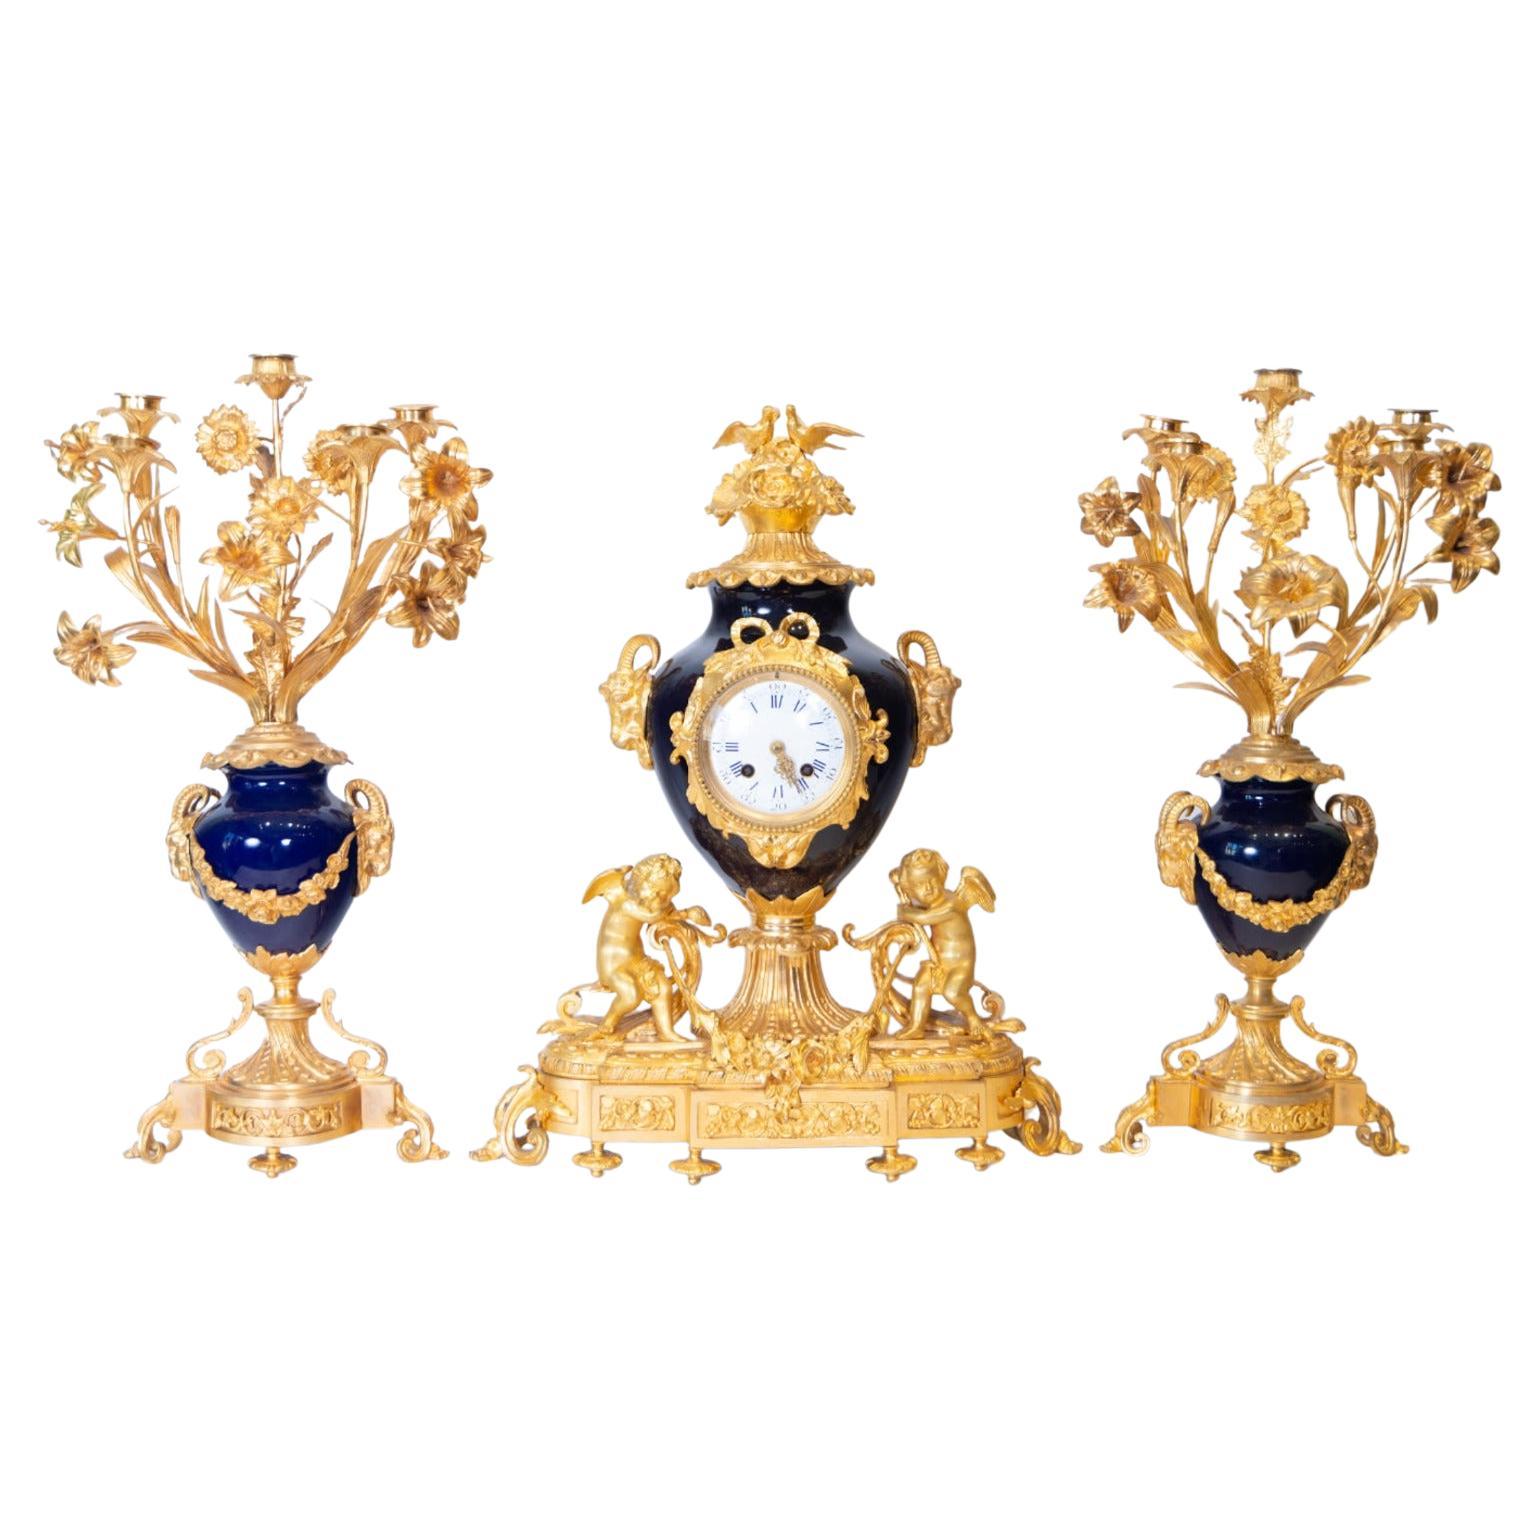 Important French Gilt Bronze and Porcelain Garniture from Sèvres 19th Century